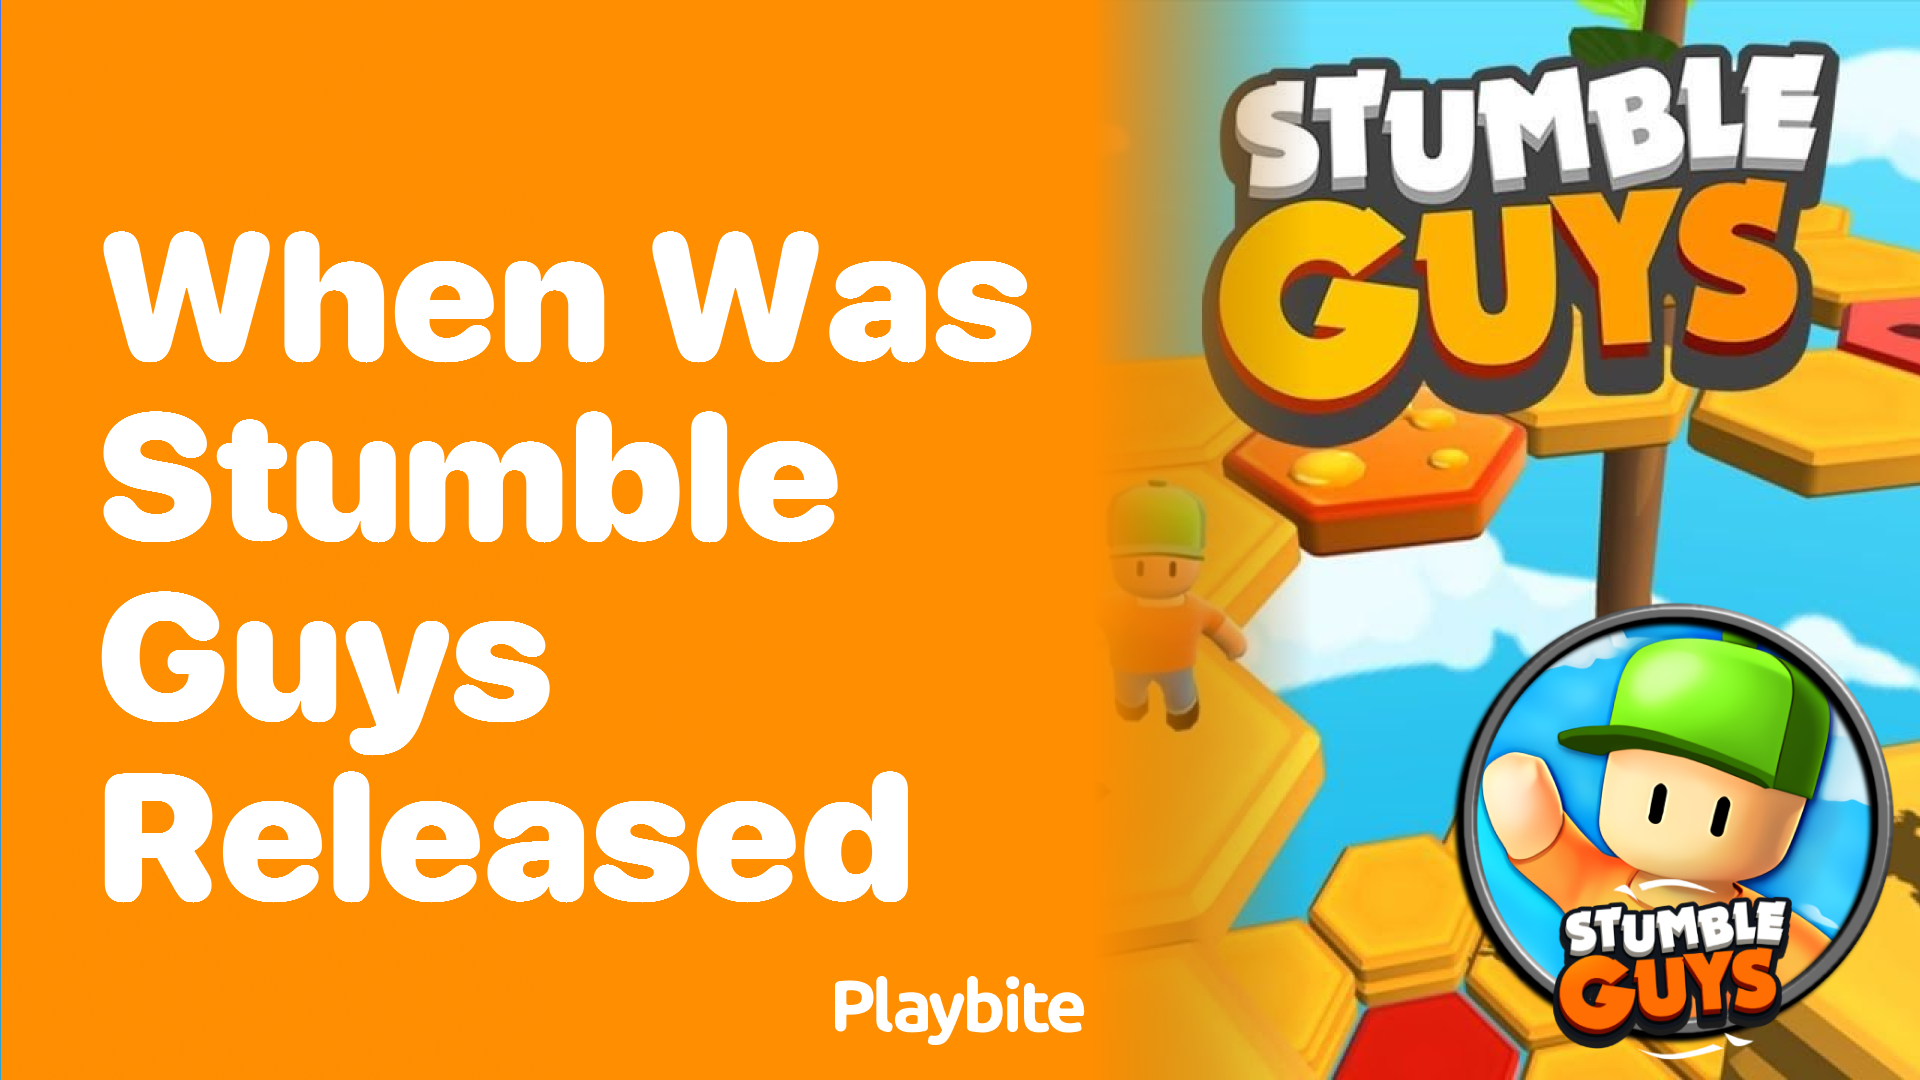 When was Stumble Guys Released?